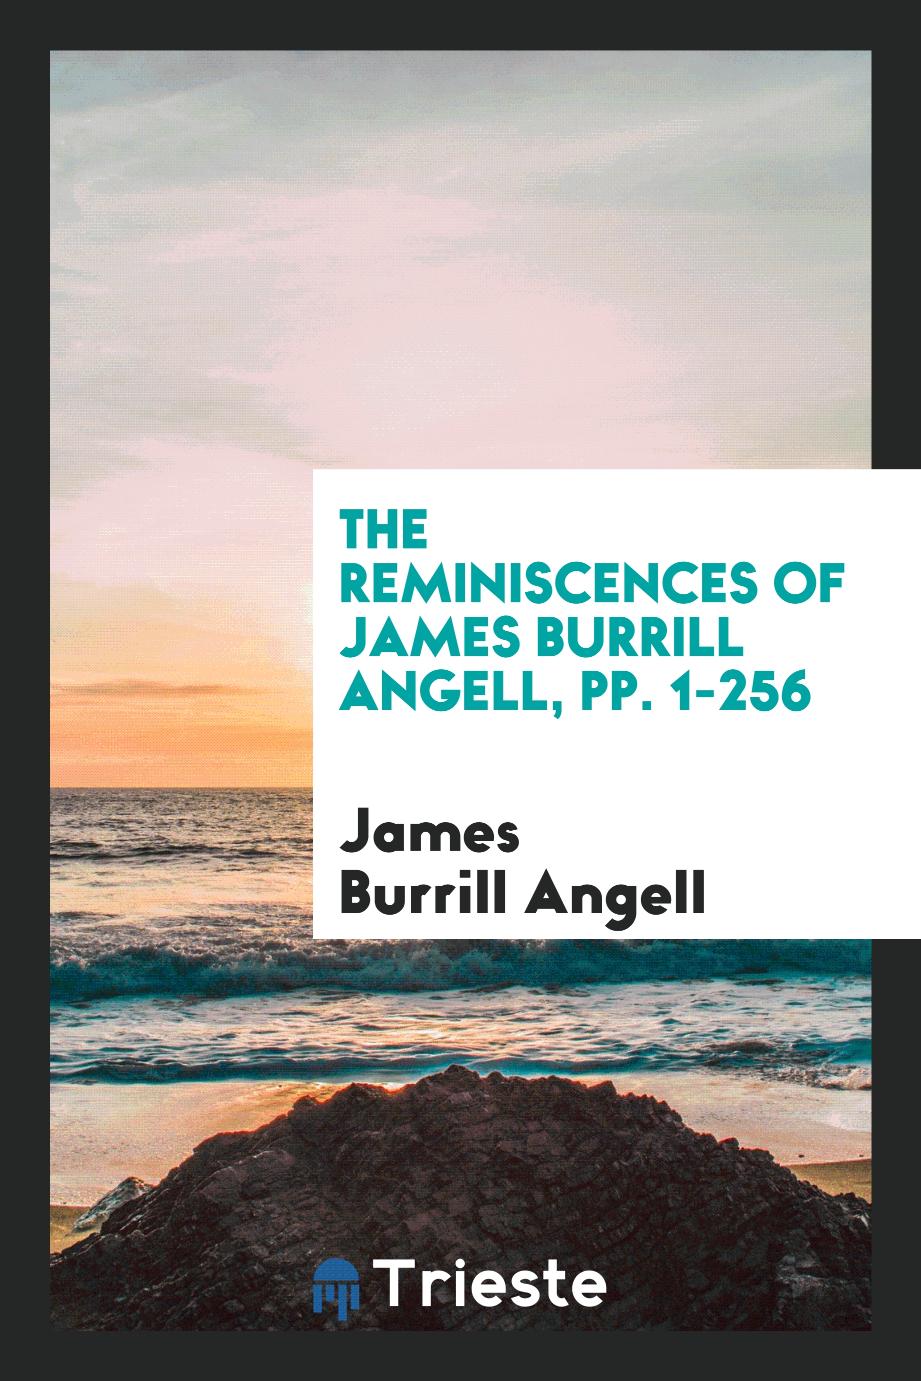 The reminiscences of James Burrill Angell, pp. 1-256